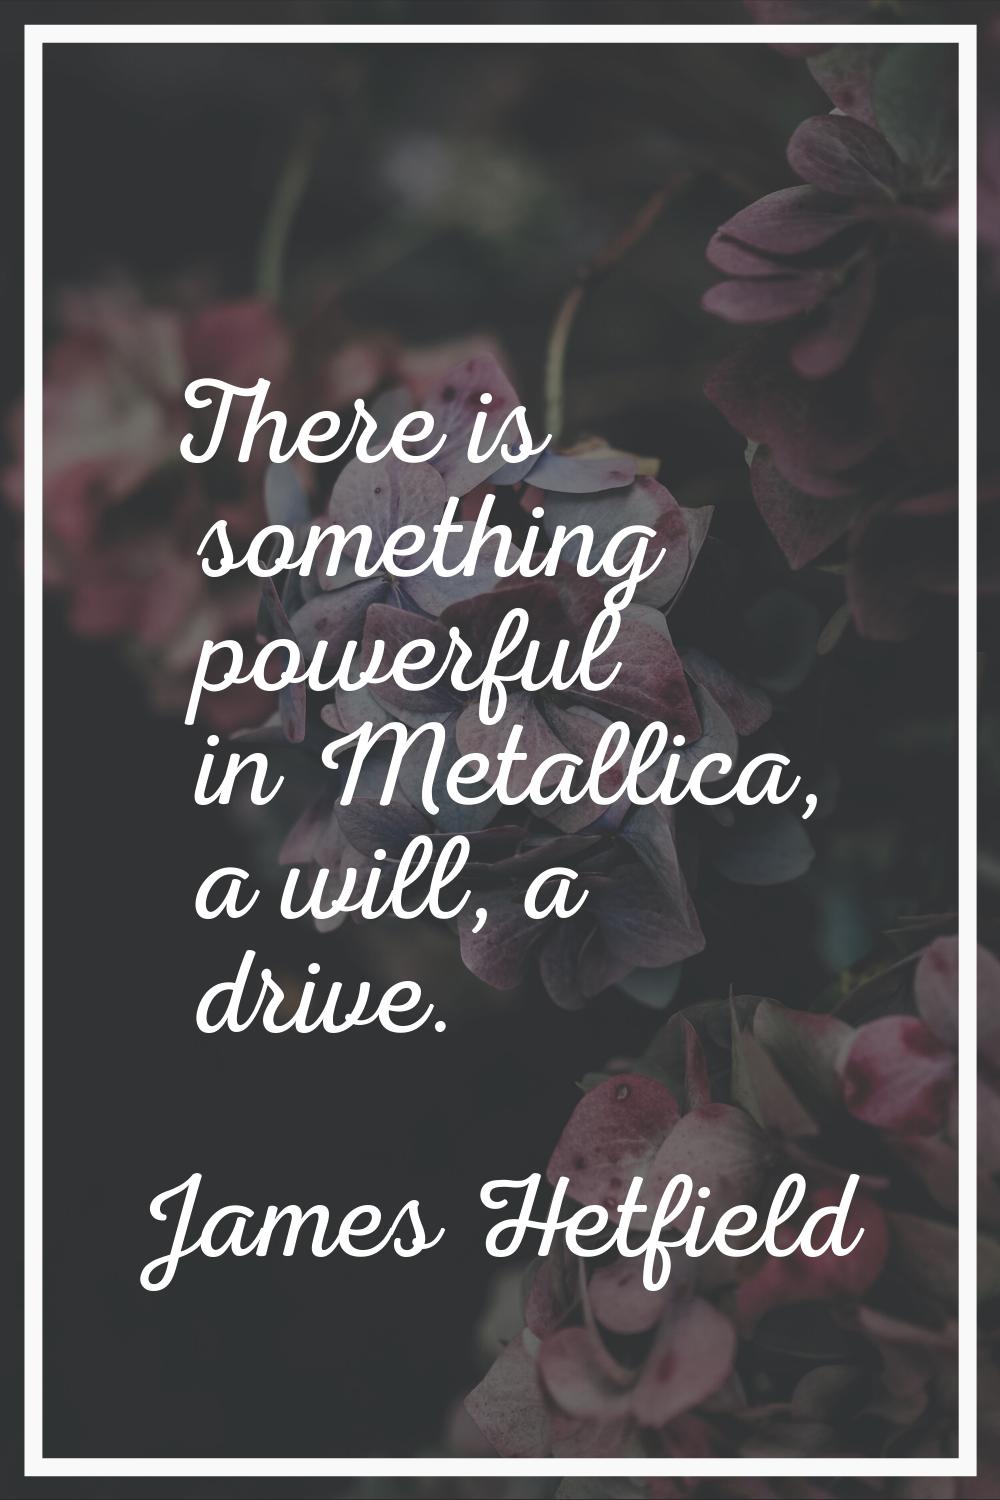 There is something powerful in Metallica, a will, a drive.